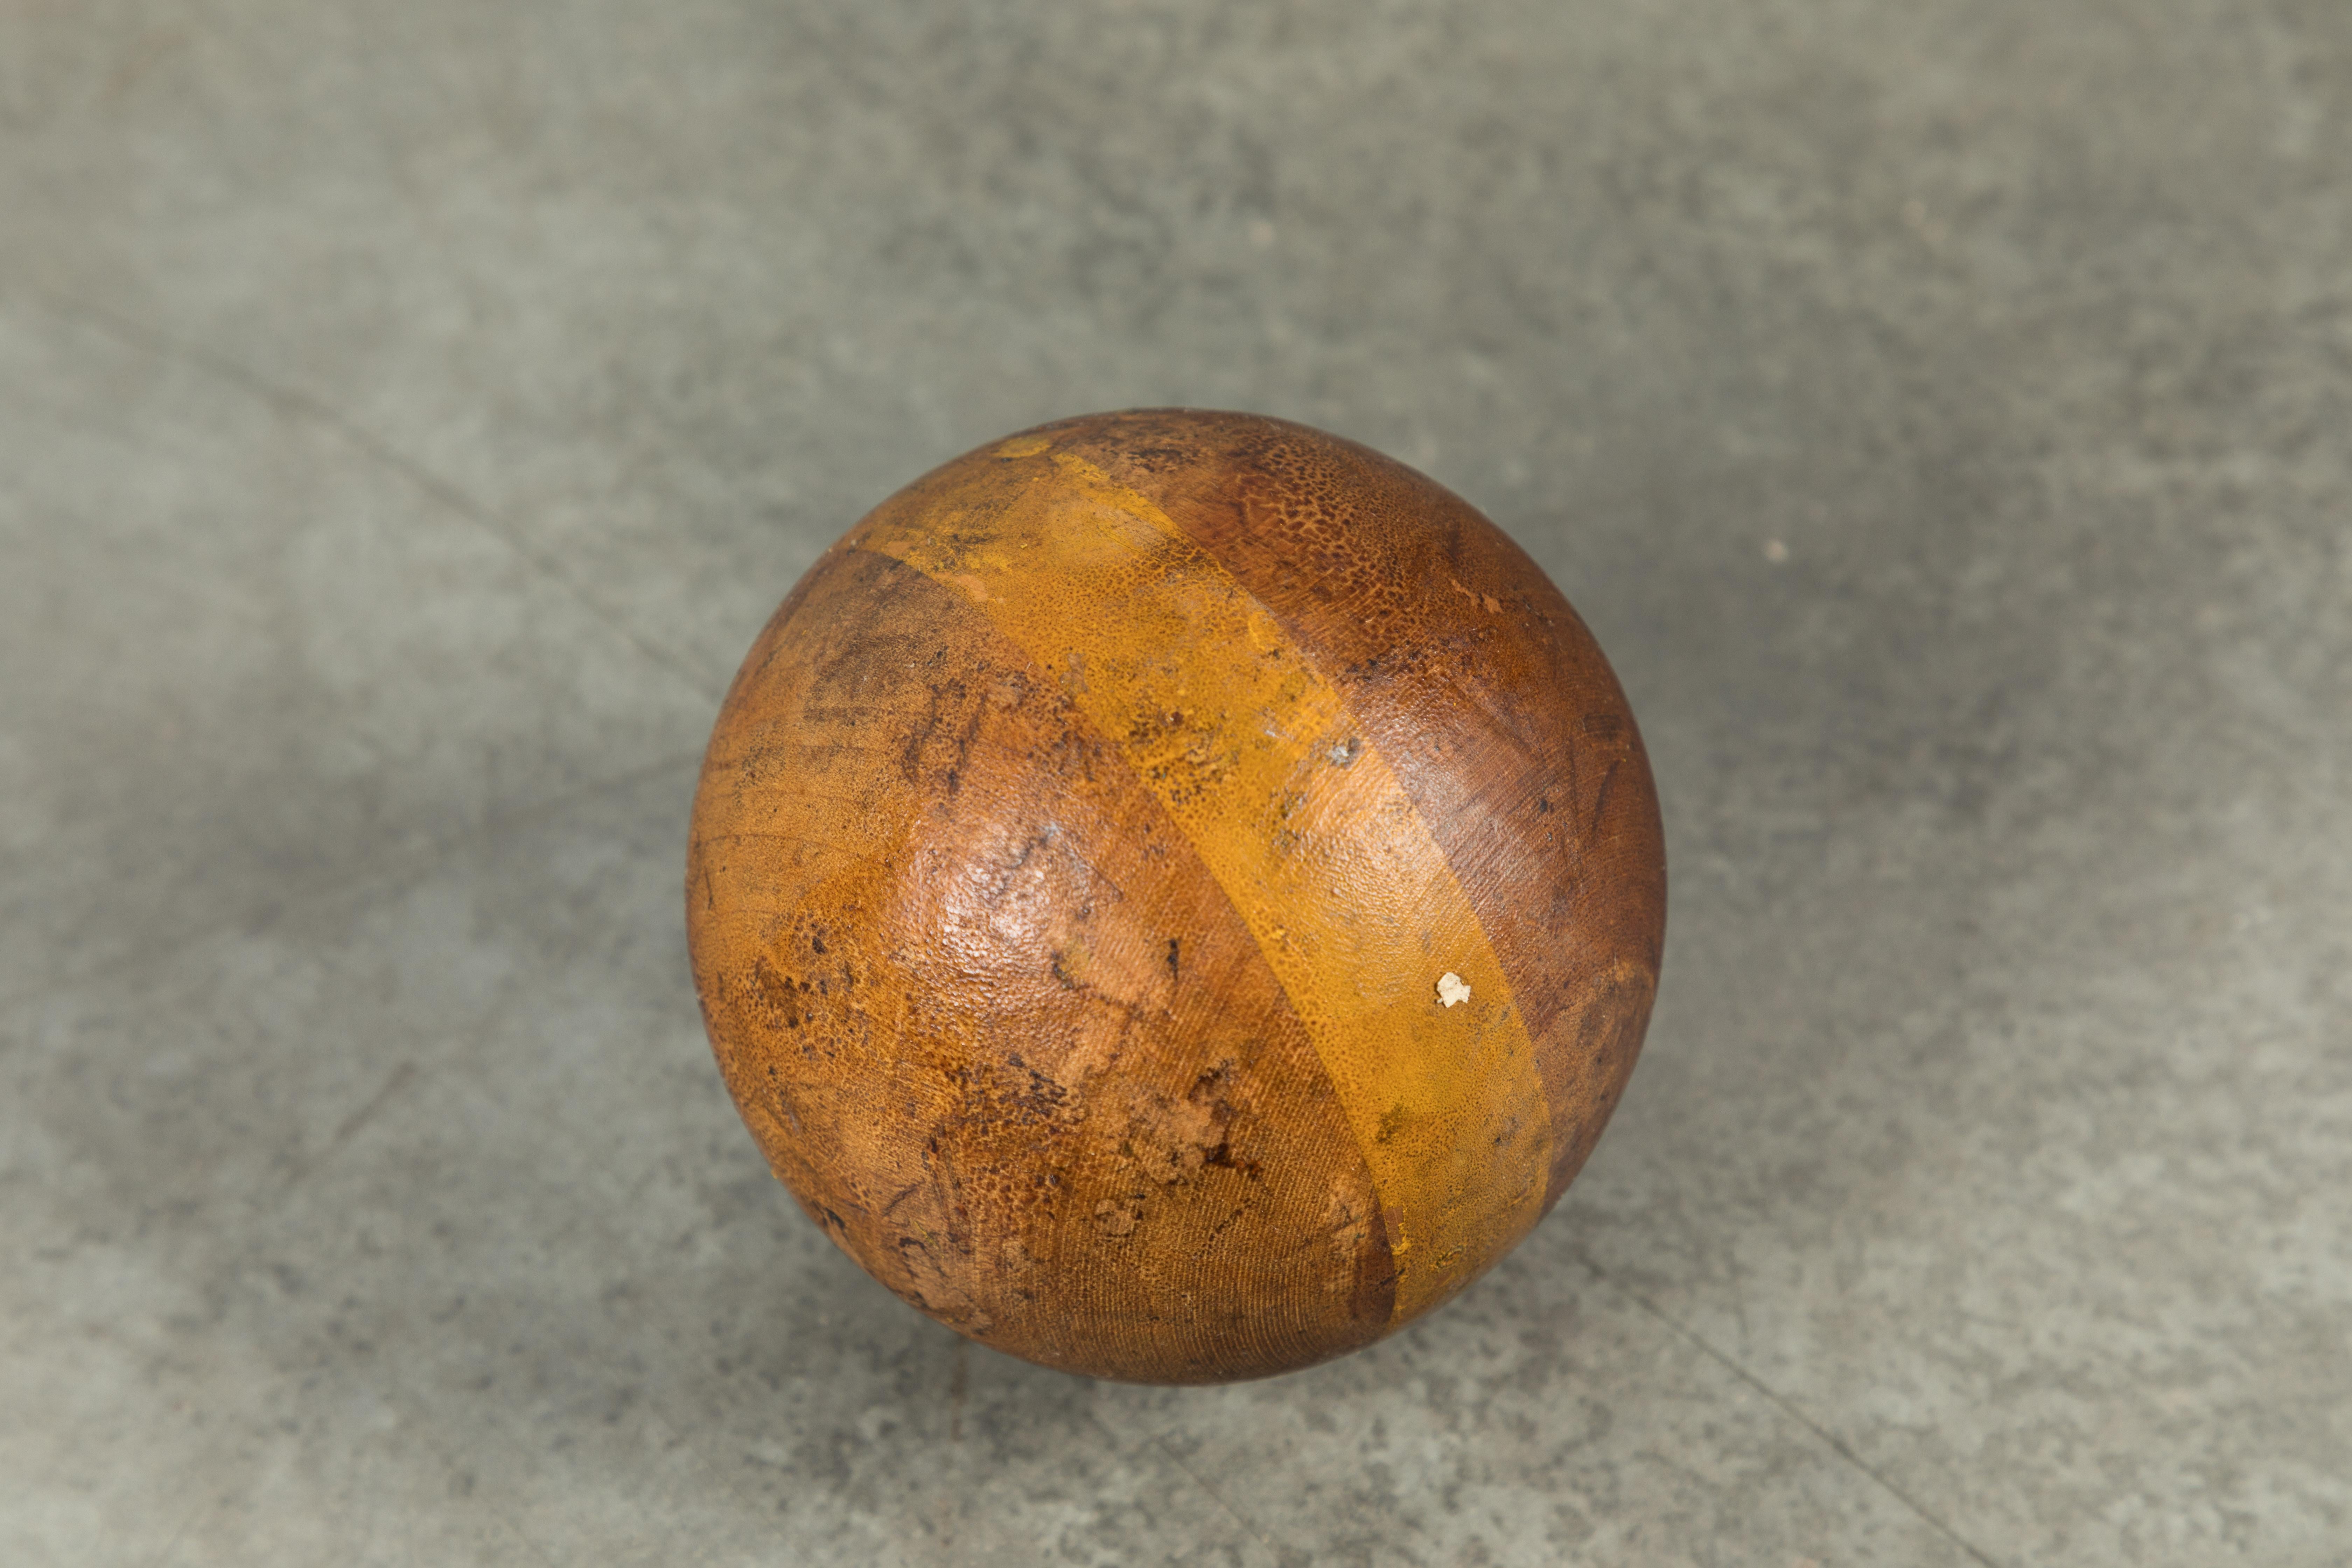 Wood Lawn Bowling Game Original Caddy and Bowling Balls, circa 1900 In Good Condition For Sale In Santa Monica, CA